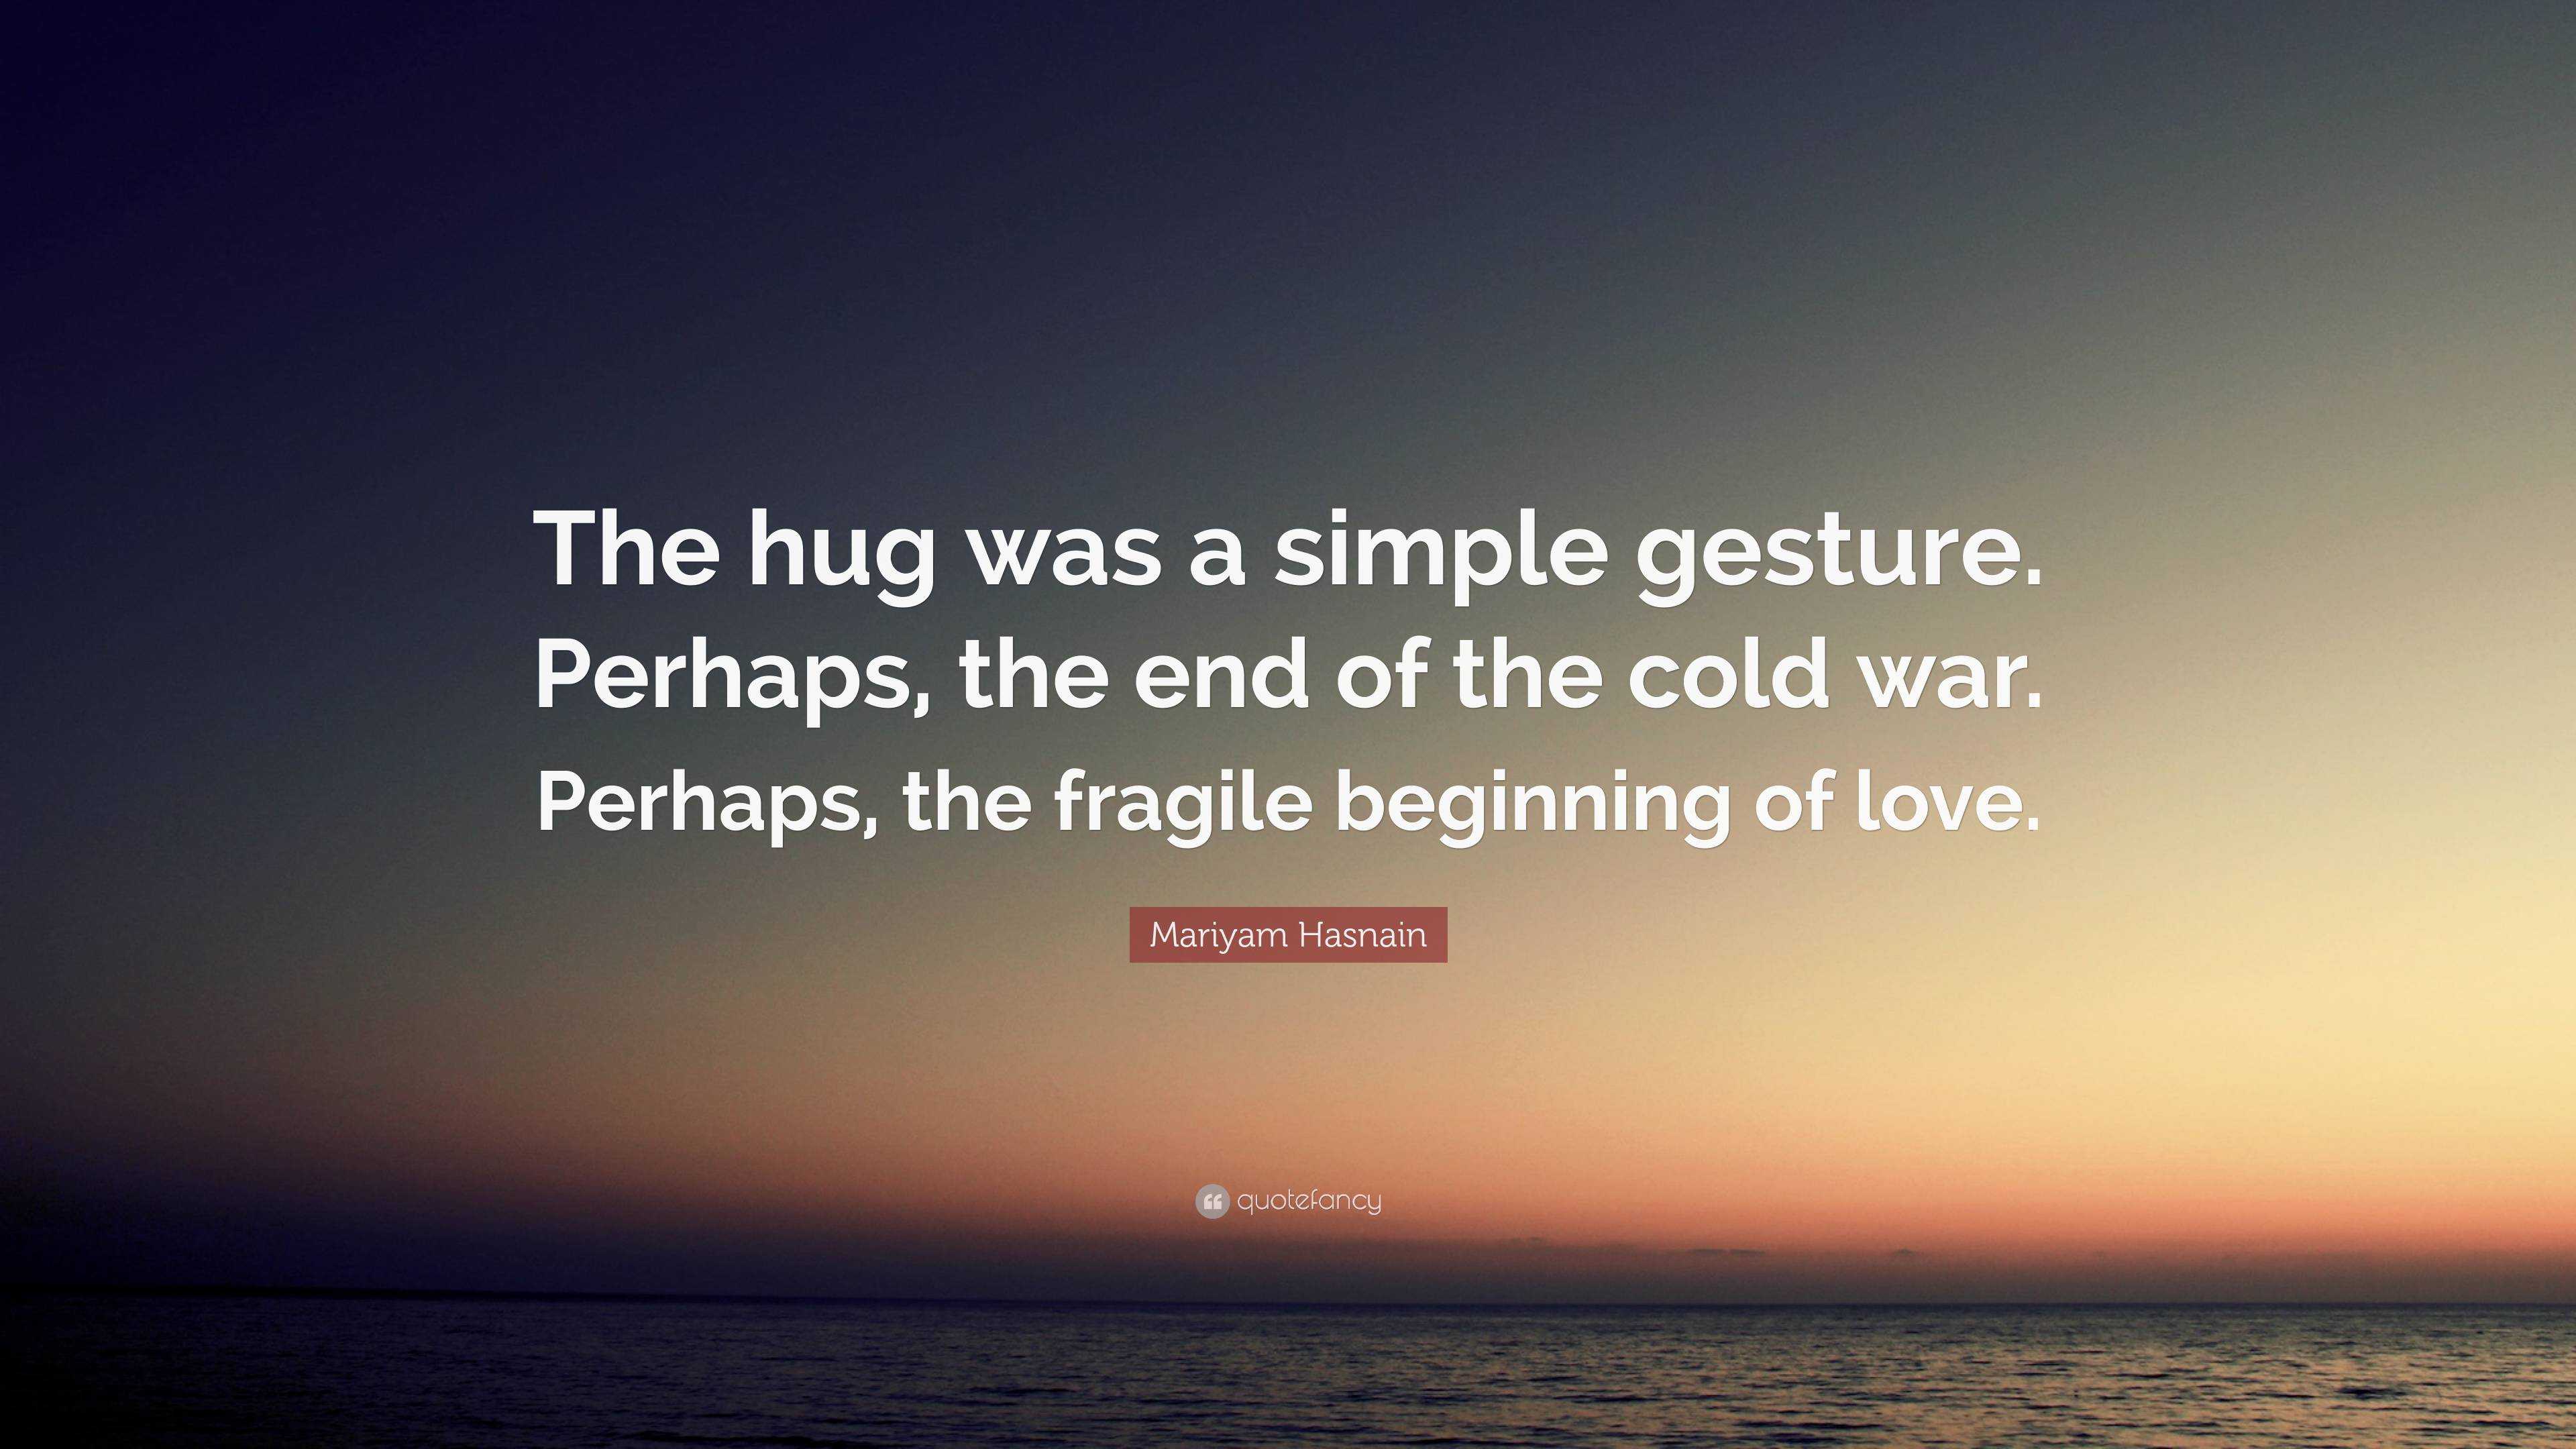 Mariyam Hasnain Quote The Hug Was A Simple Gesture Perhaps The End Of The Cold War